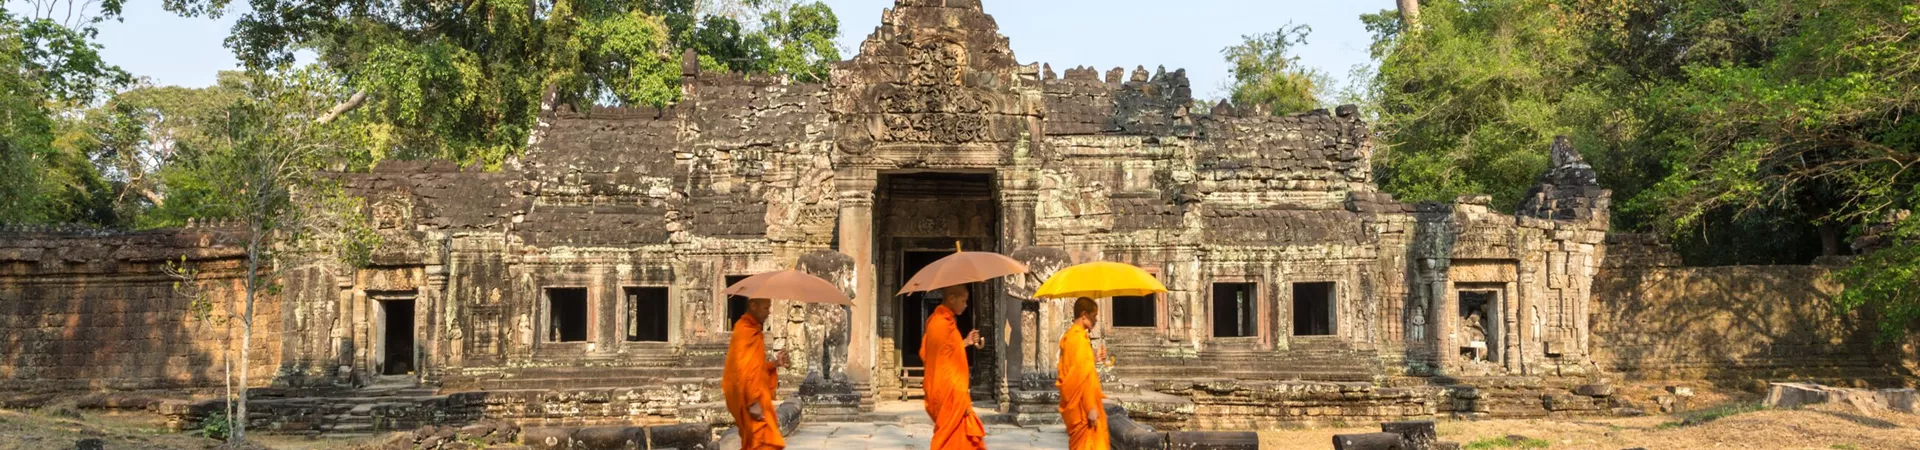 Three Monks With Umbrellas Walking Inside A Temple in Angkor Wat, Cambodia